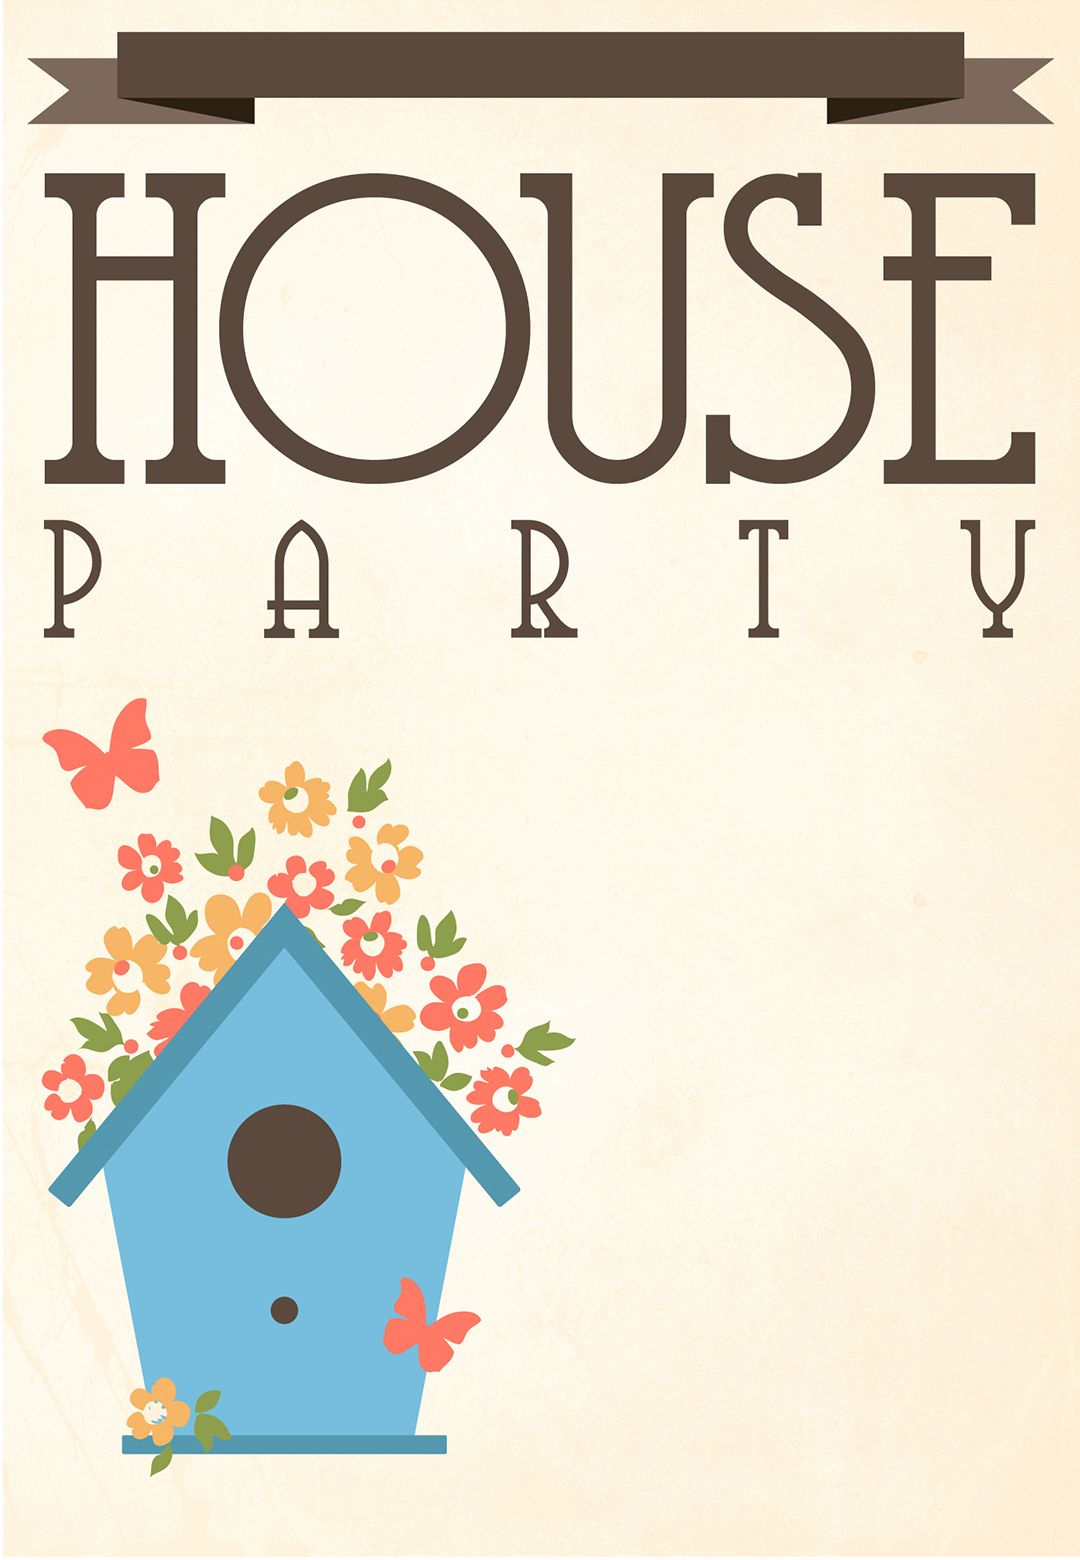 Free Printable House Party Invitation Fontsprintablestemplates pertaining to measurements 1080 X 1560